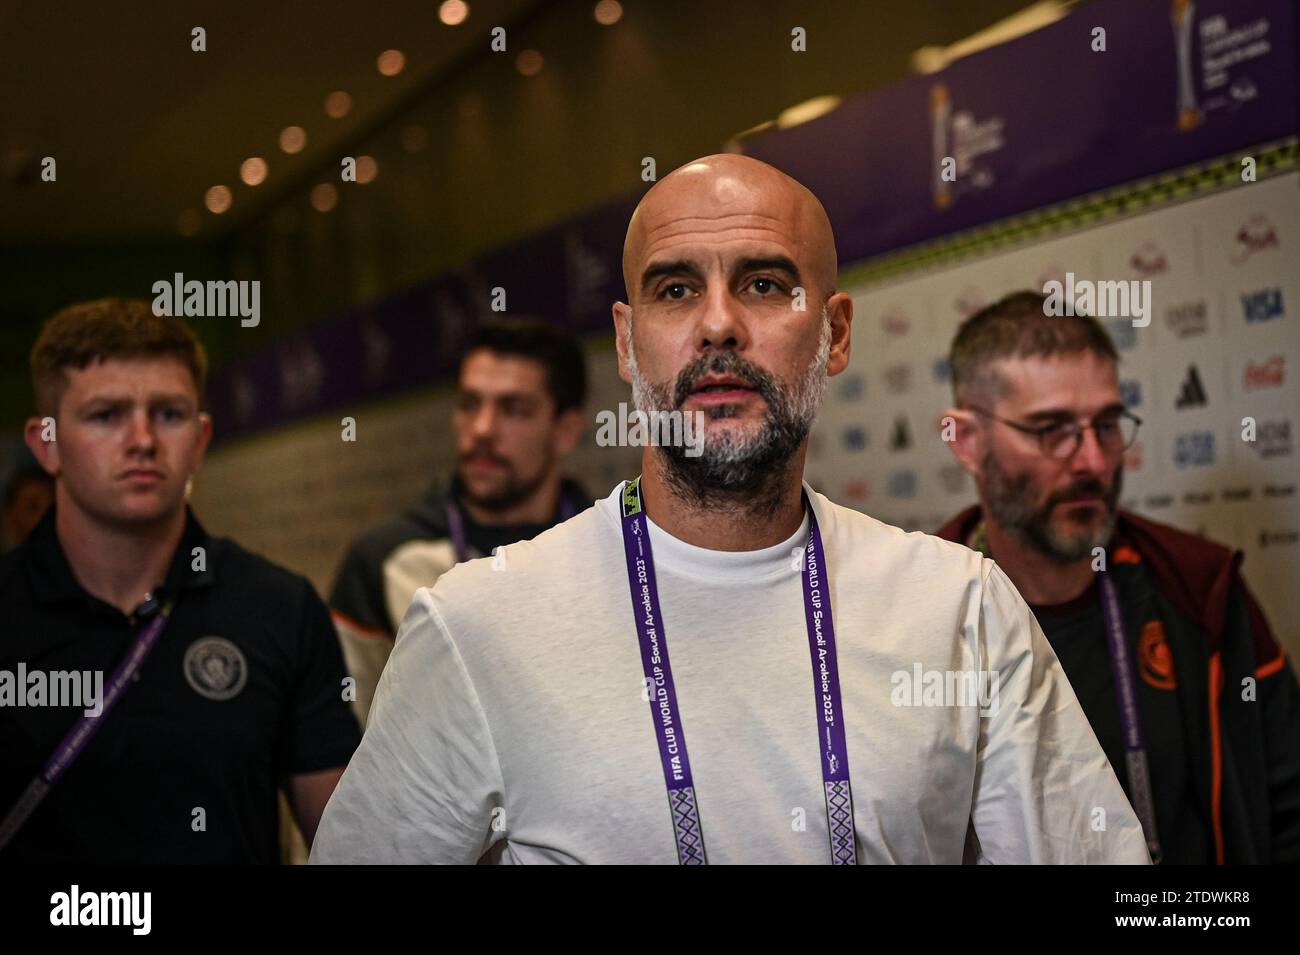 Jeddah, Saudi Arabia. 19th Dec, 2023. King Abdullah Sports City Manchester City head coach Pep Guardiola arrives at stadium before the FIFA Club World Cup Semi Final between Urawa Reds of Japan and Manchester City of England at the King Abdullah Sports City Stadium in Jeddah, Saudi Arabia. City won the game 3-0 and will play Fluminense of Brazil in the final on Friday. (Alexandre Neto/SPP) Credit: SPP Sport Press Photo. /Alamy Live News Stock Photo